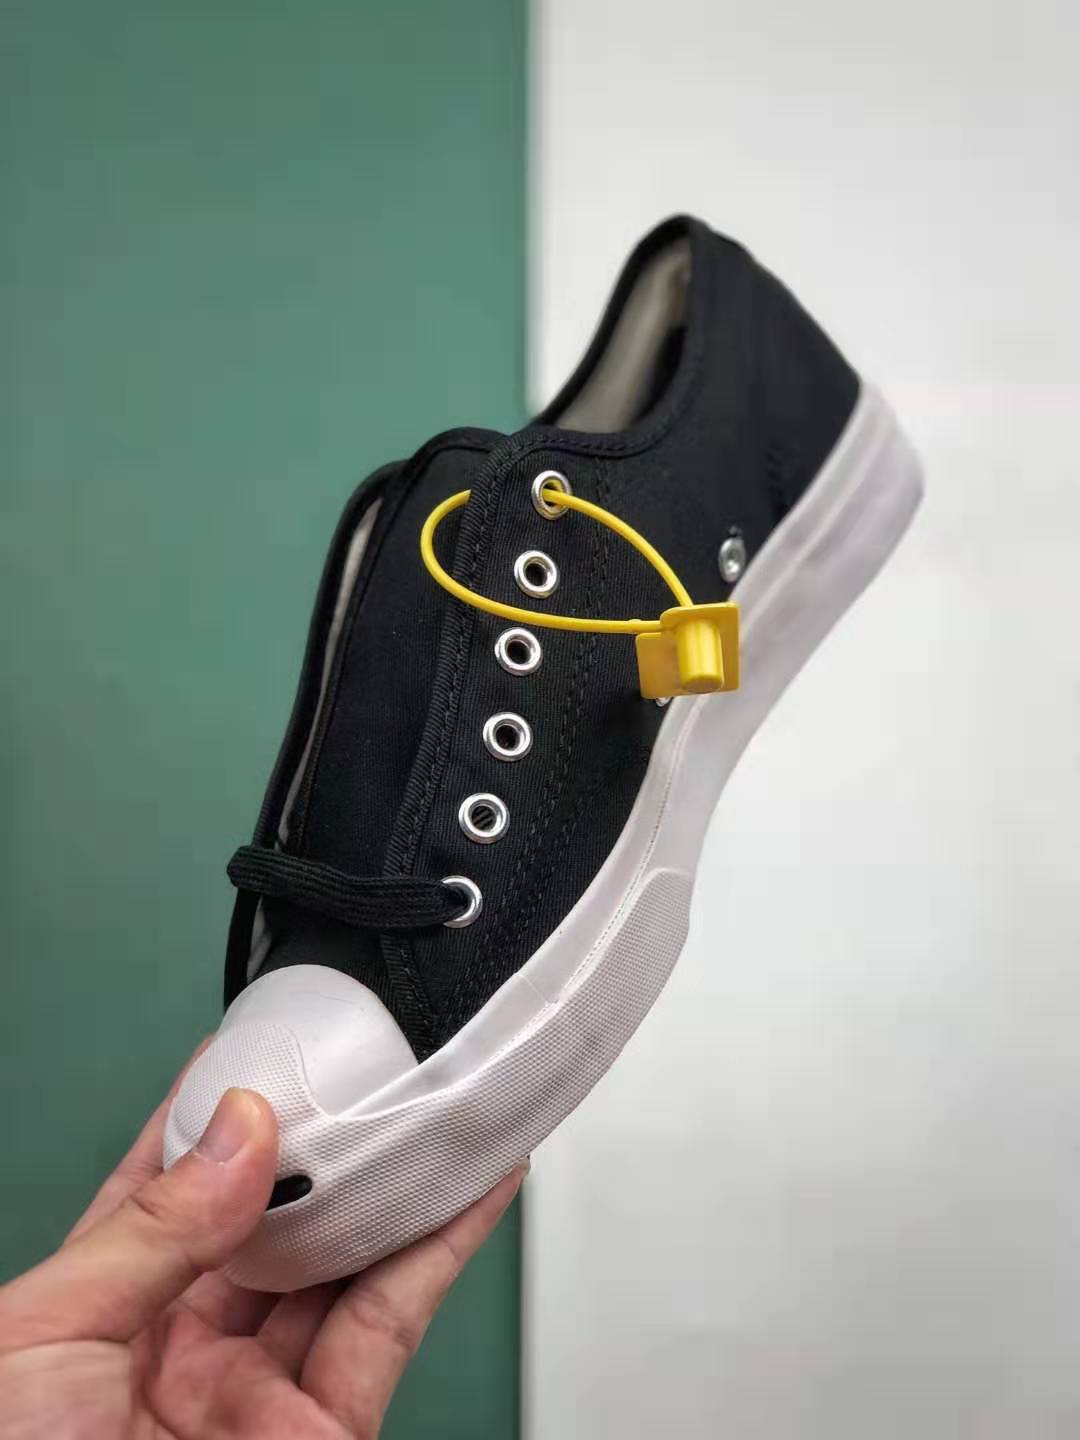 Converse Jack Purcell Black - Classic Style for Every Occasion